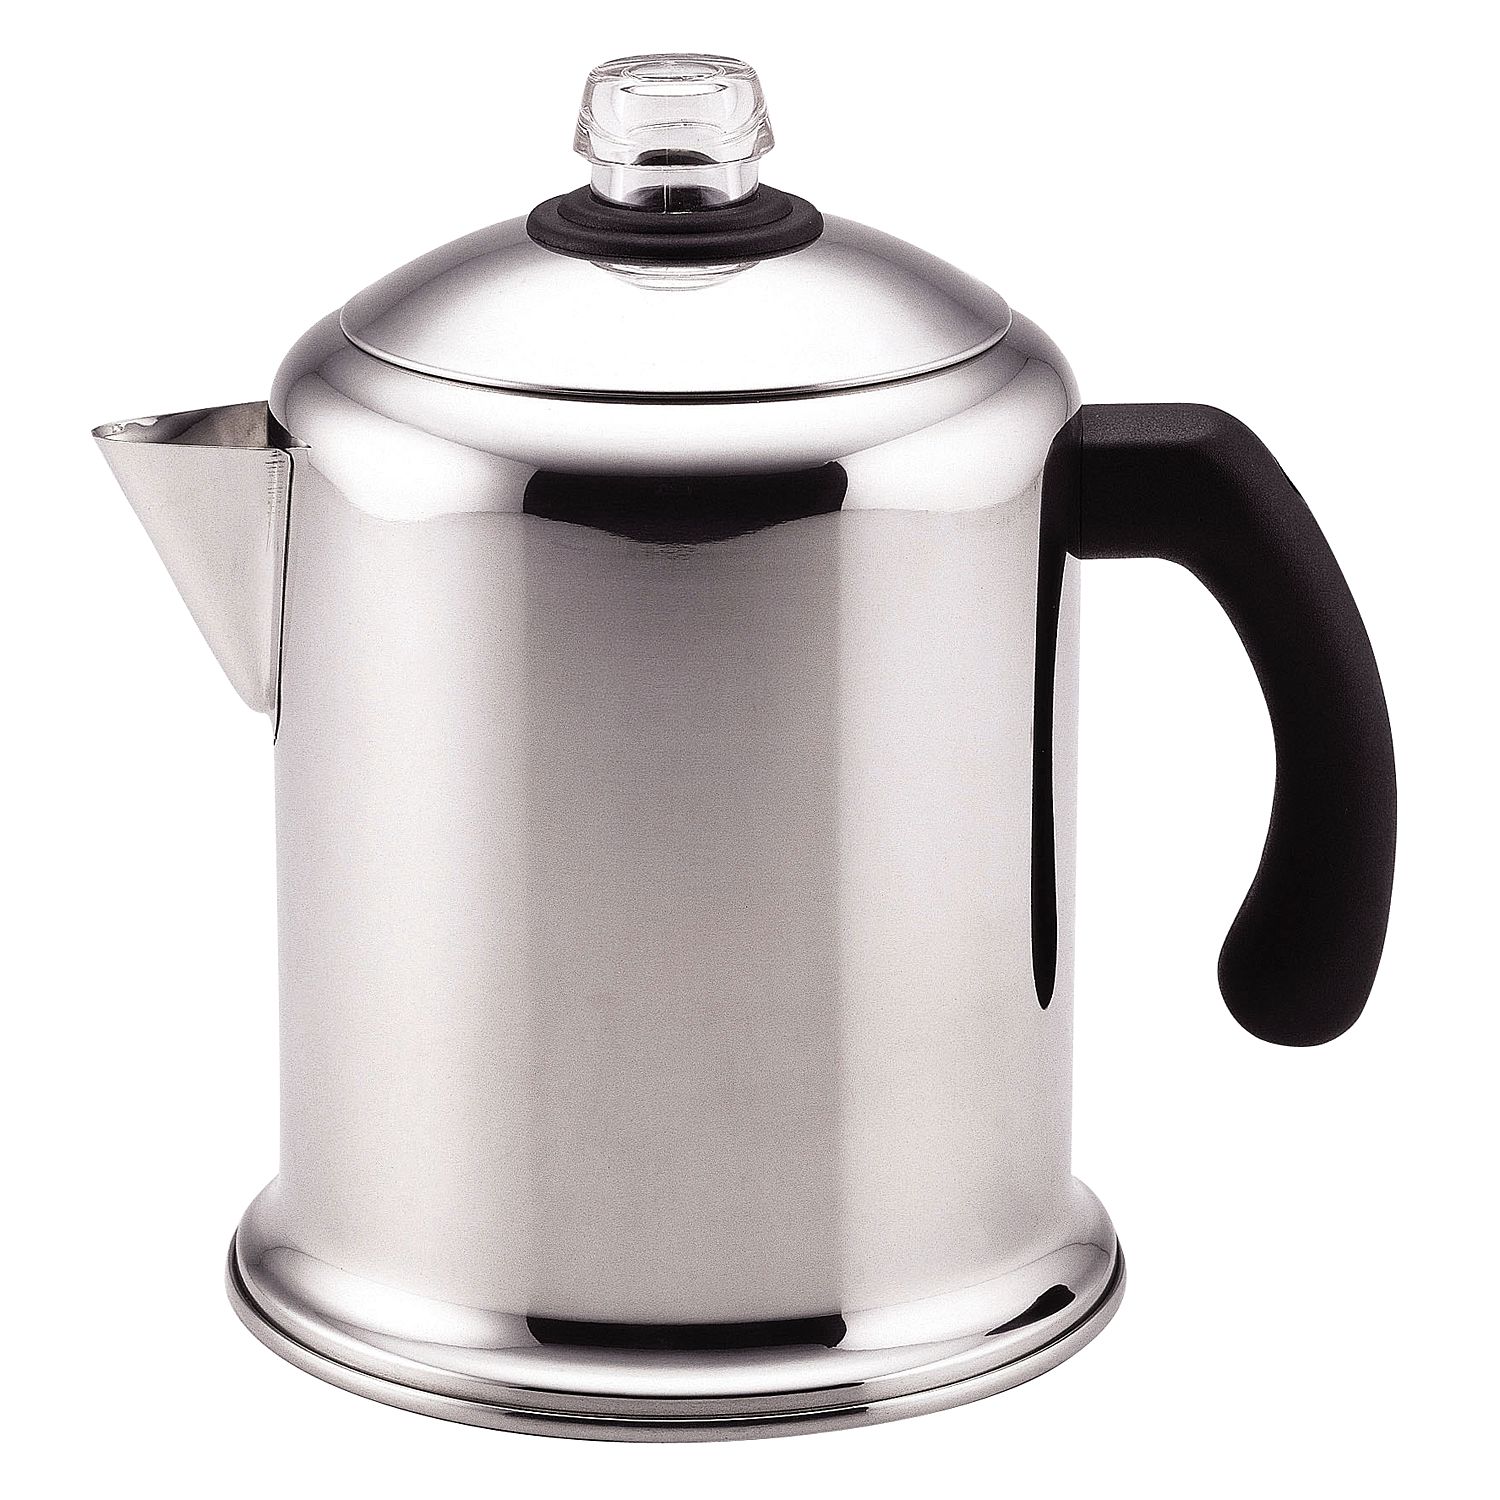 Rapid Brew 2-6 Cup Stainless Steel Percolator